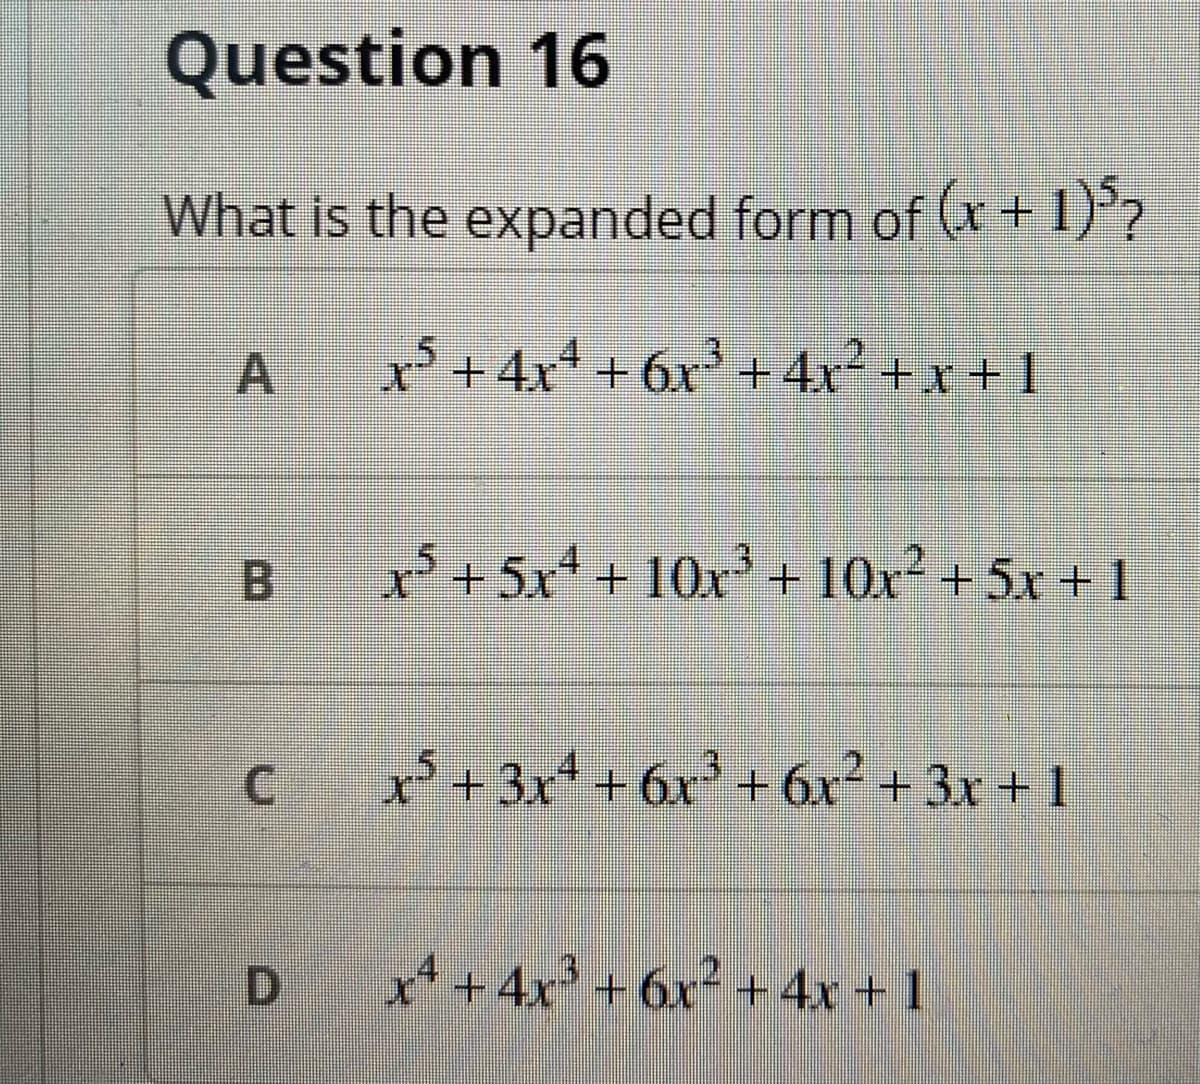 Question 16
What is the expanded form of (x + 1)°?
A
x+4x* + 6x' + 4x2 + x + 1
B.
r+5x + 10x + 10x² + 5x + 1
*+3x + 6x' + 6x² + 3x + 1
.4
.2
D.
x* +4x' +6x² +4x +1
C.
